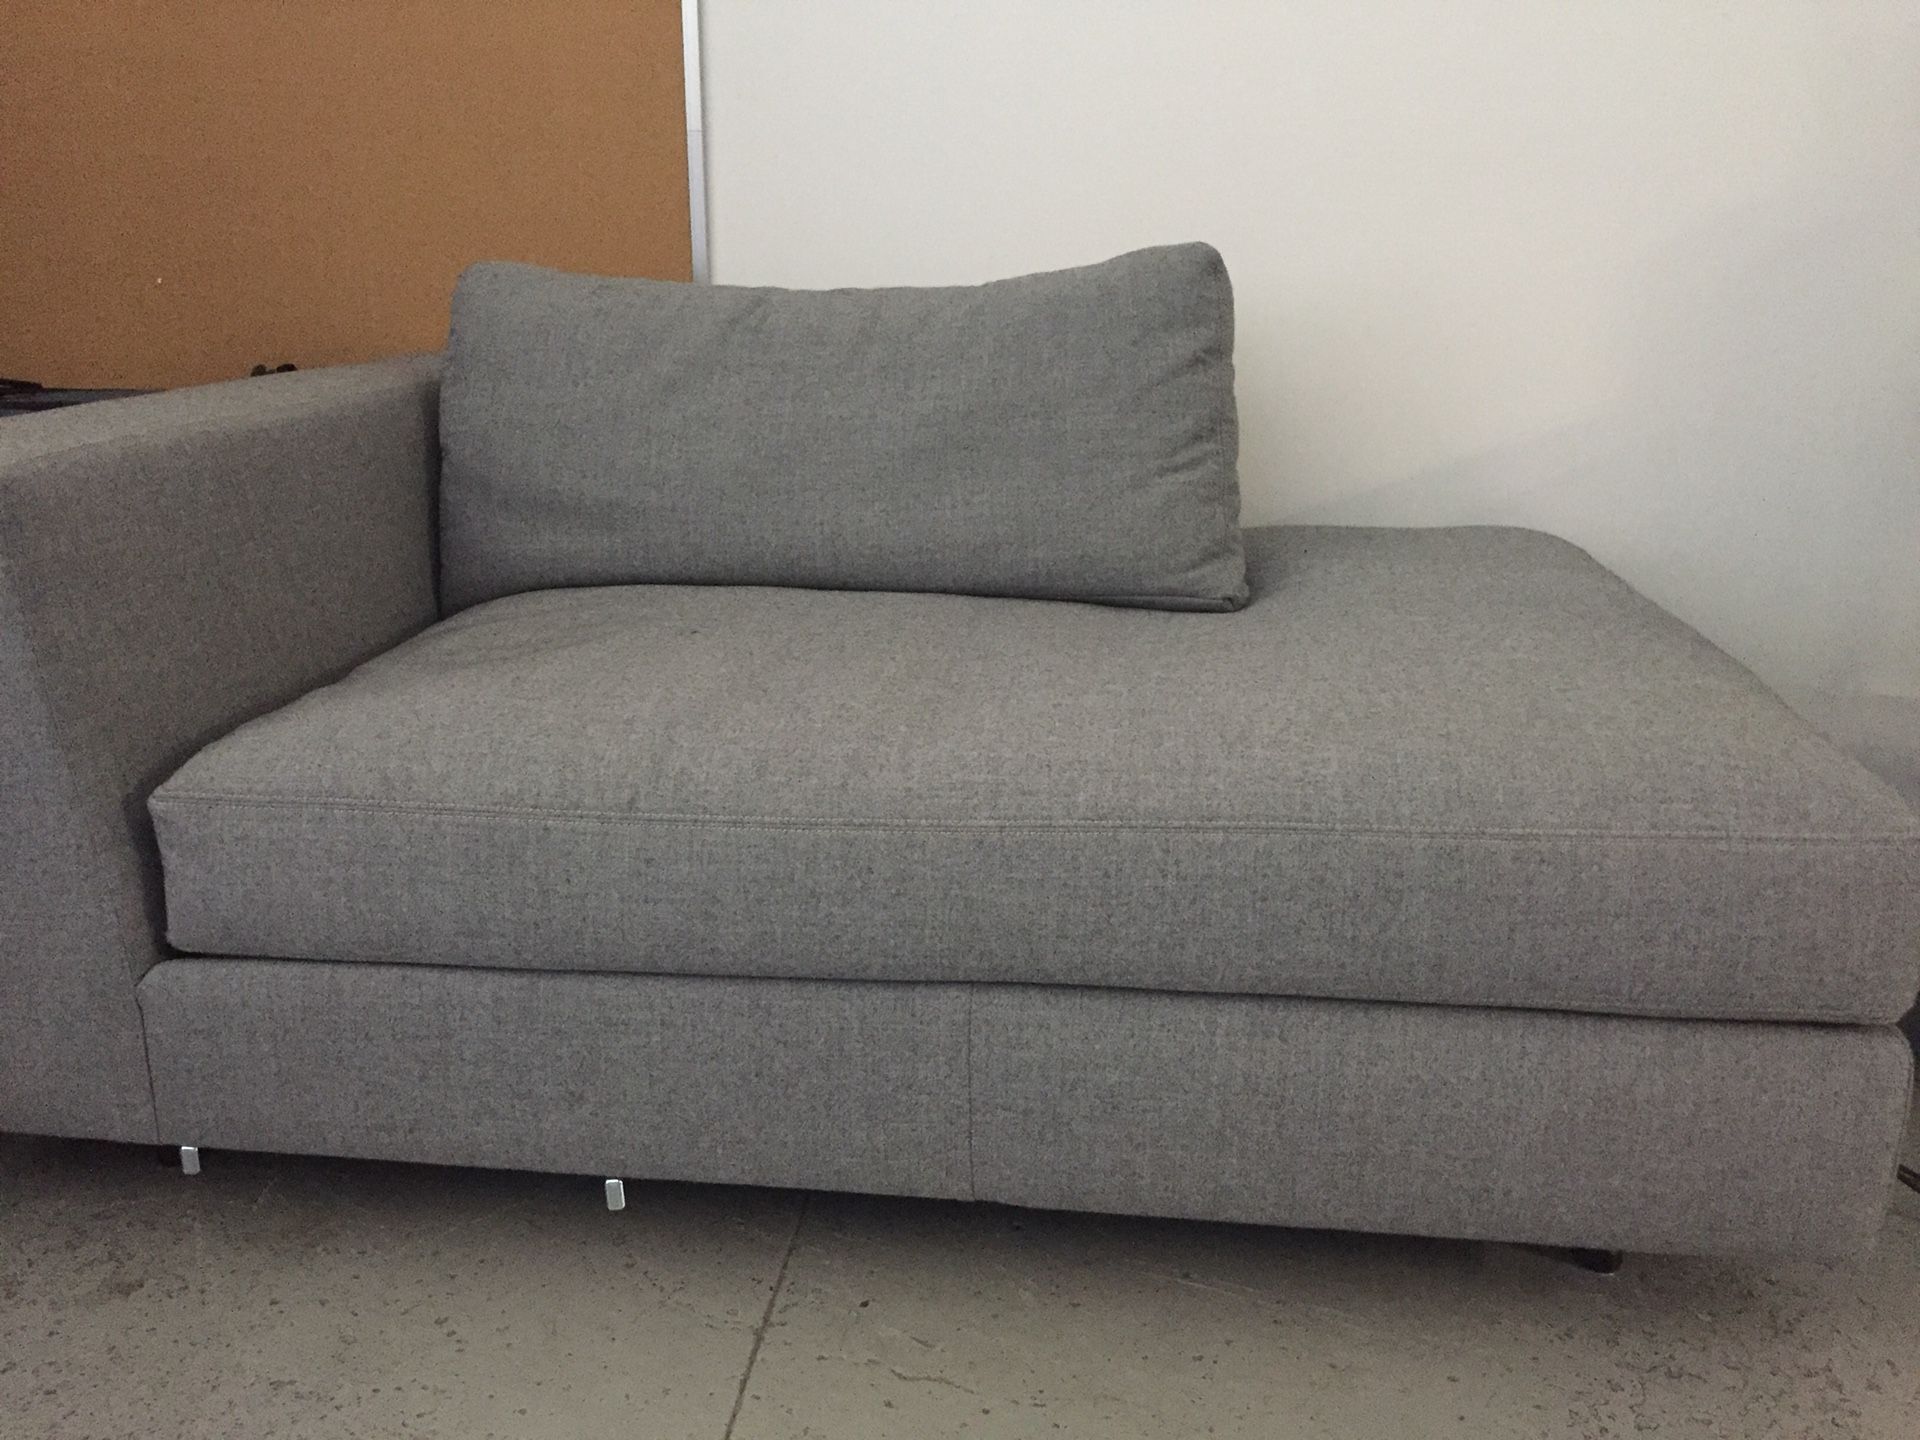 Cb2 Gray Chaise Lounge - OBO